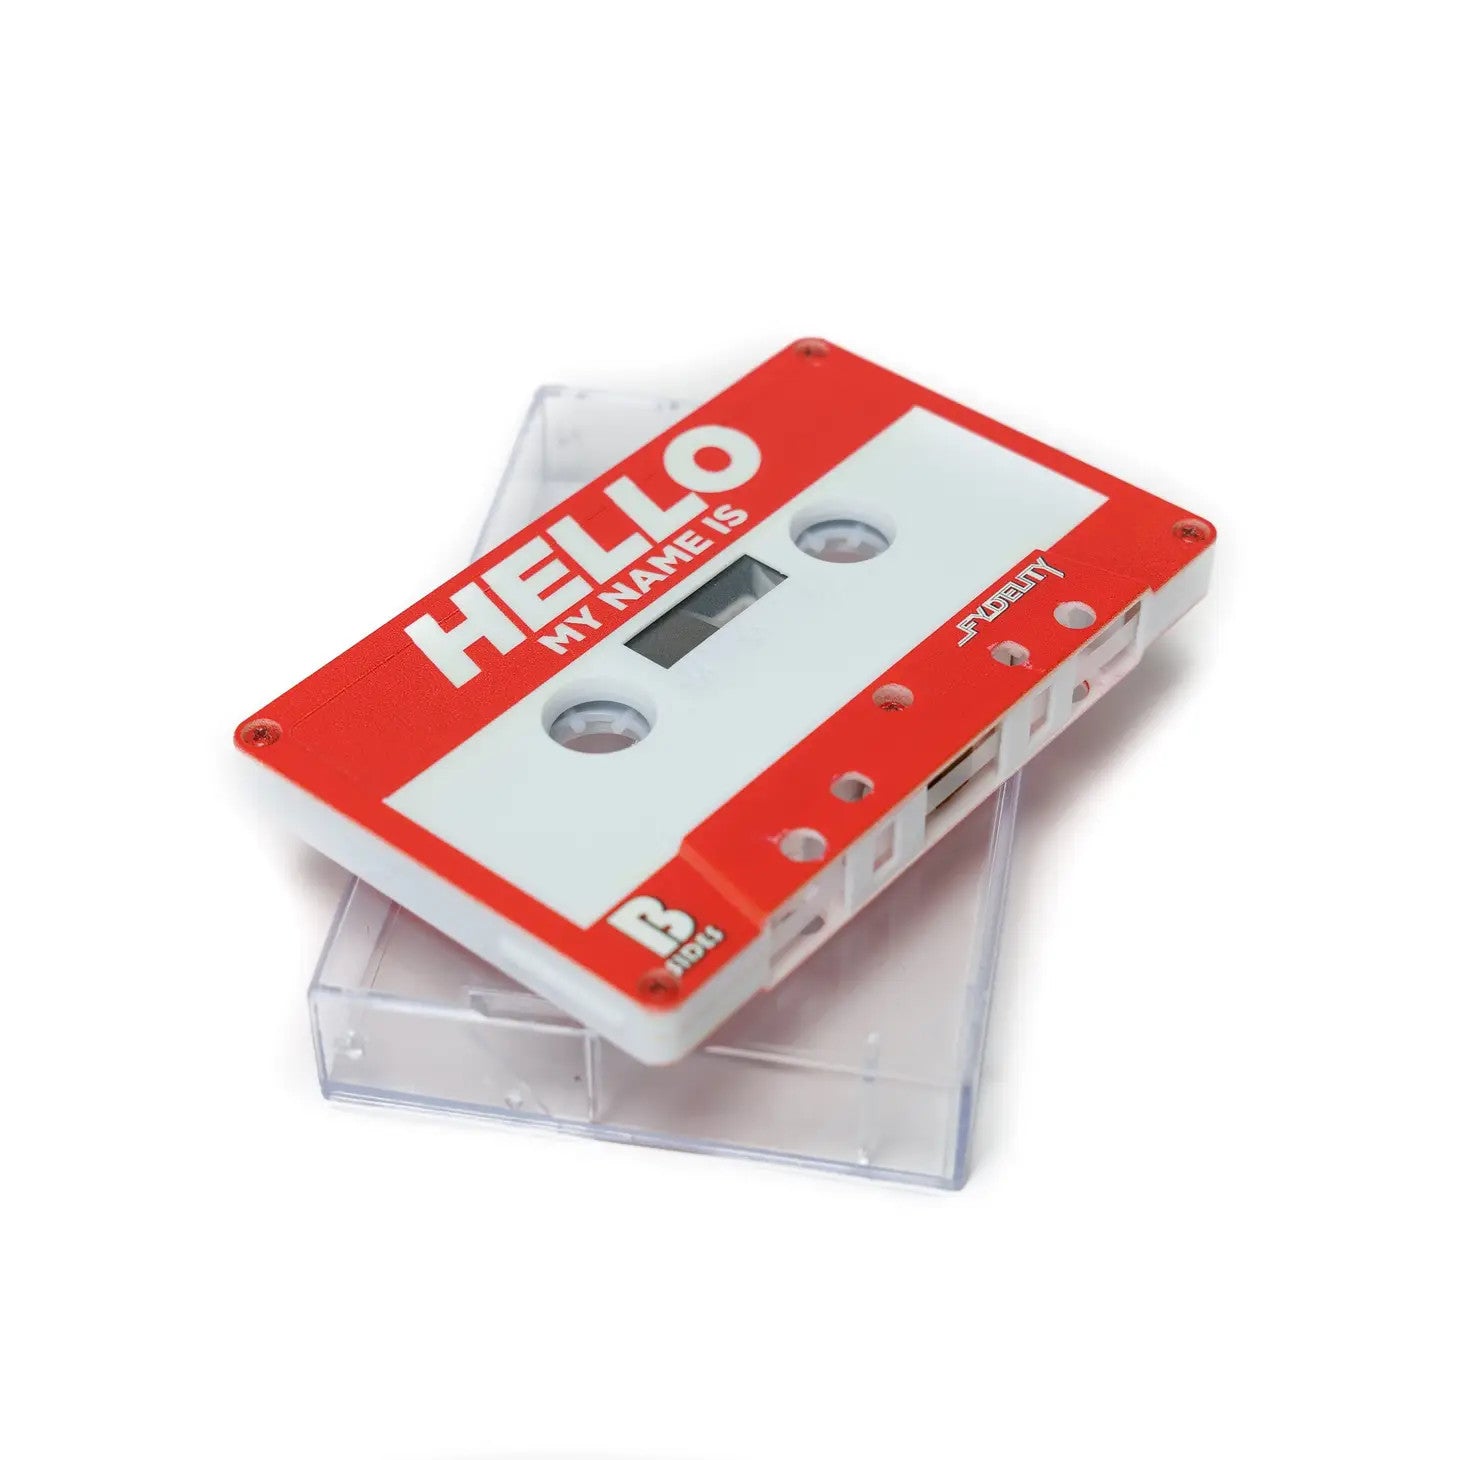 Audio Cassette Tape: Blank 60Min HELLO My Name Is - Darkside Records